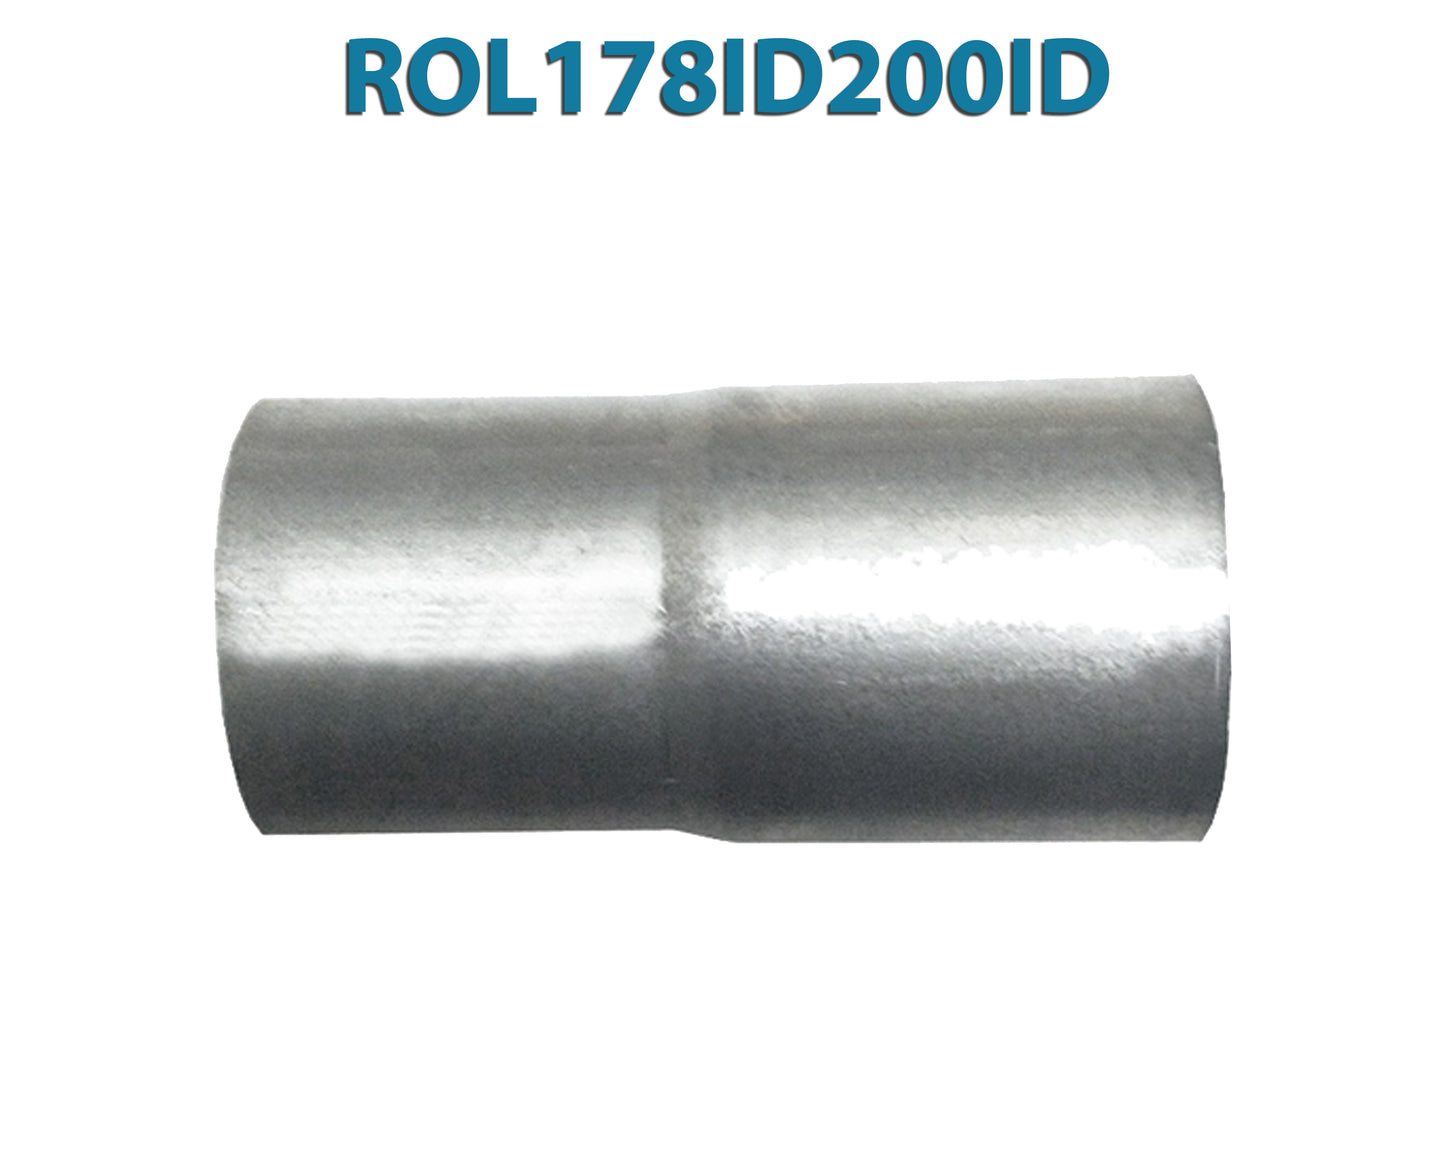 ROL178ID200ID 548544 1 7/8” ID to 2” ID Universal Exhaust Pipe to Pipe Adapter Reducer